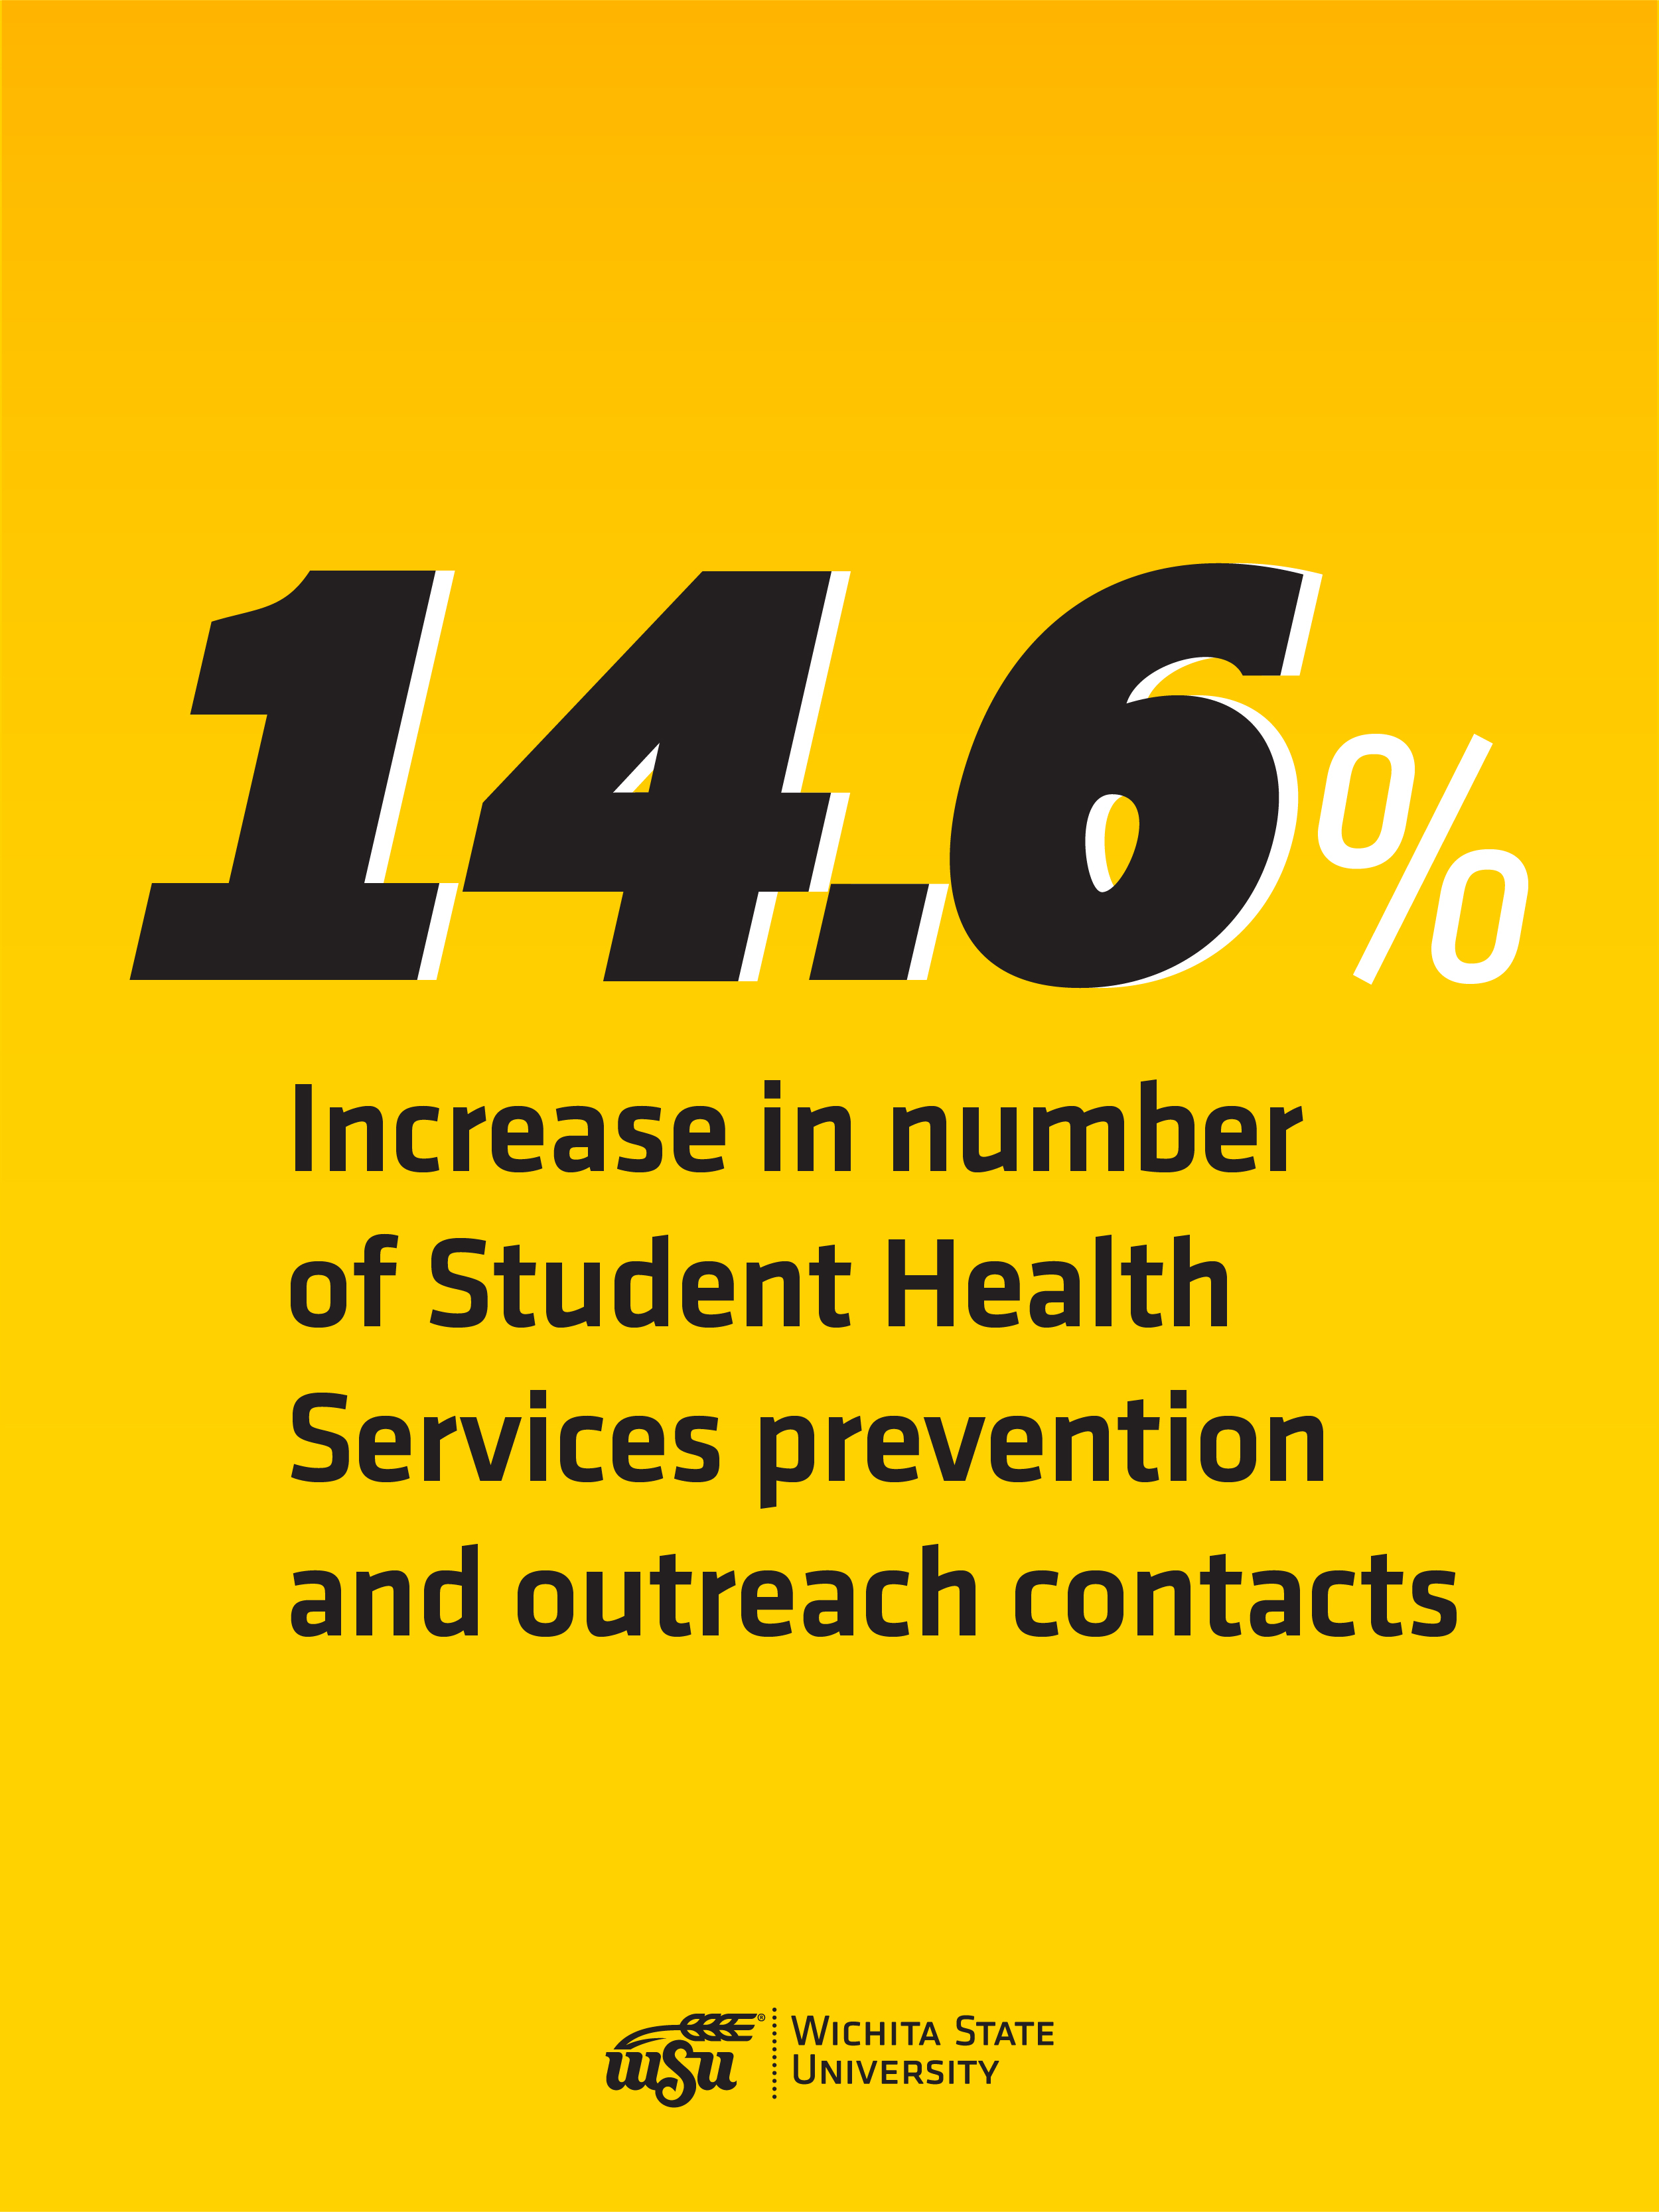 The number of SHS’s prevention and outreach contacts increased 14.59%